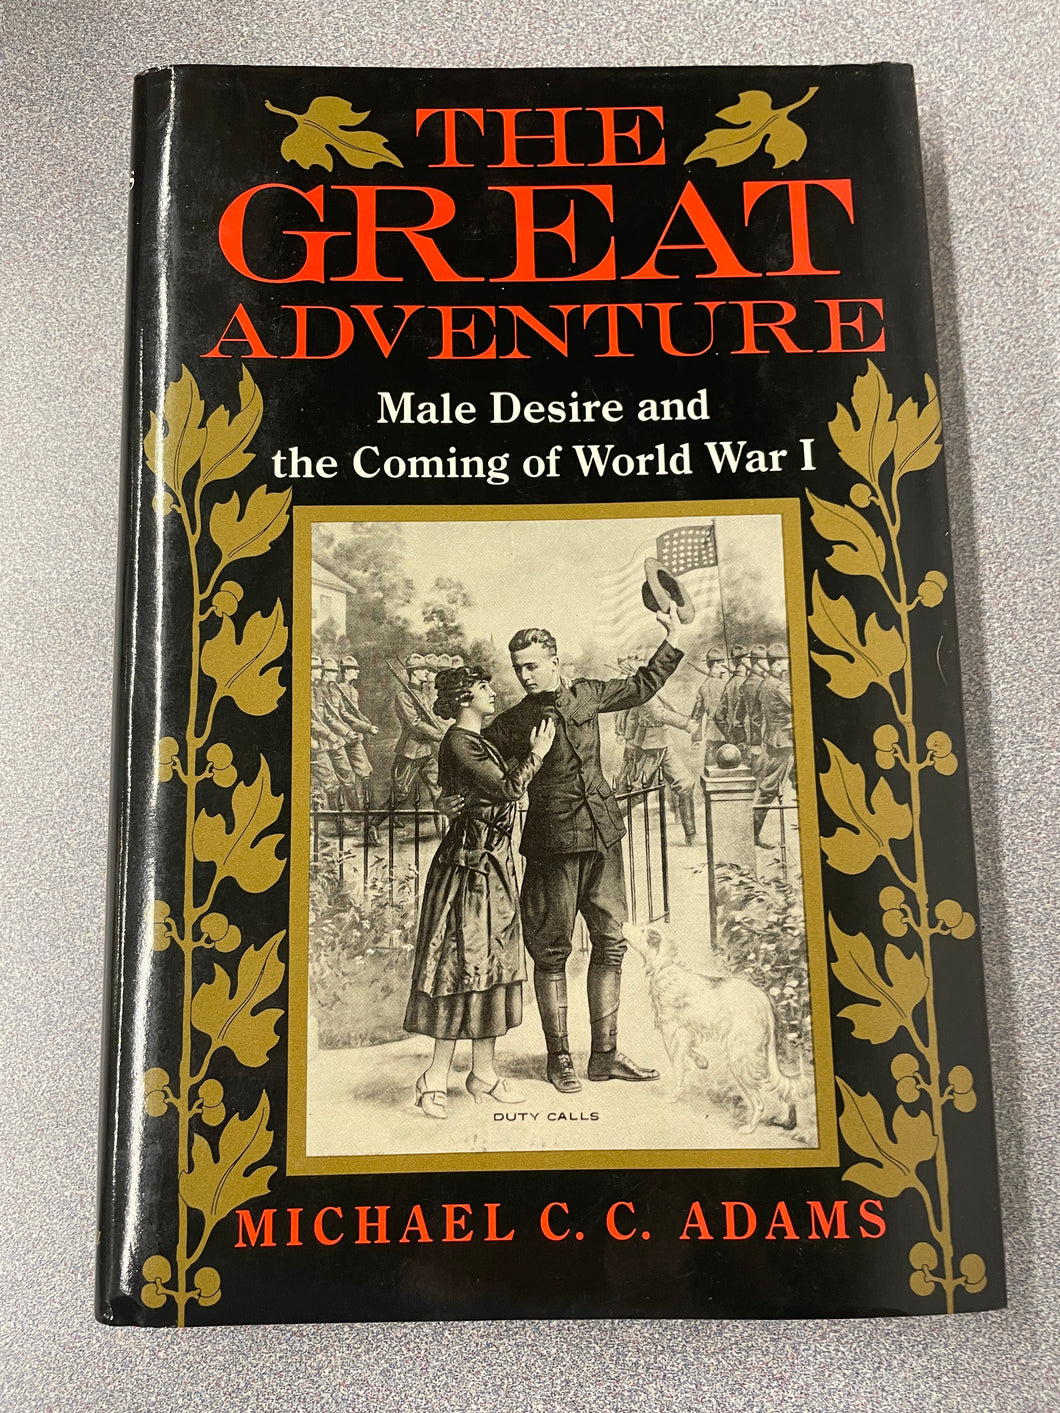 H  The Great Adventure: Male Desire and the Coming of World War I, Adams, Michael C. C. [1990] N 5/24